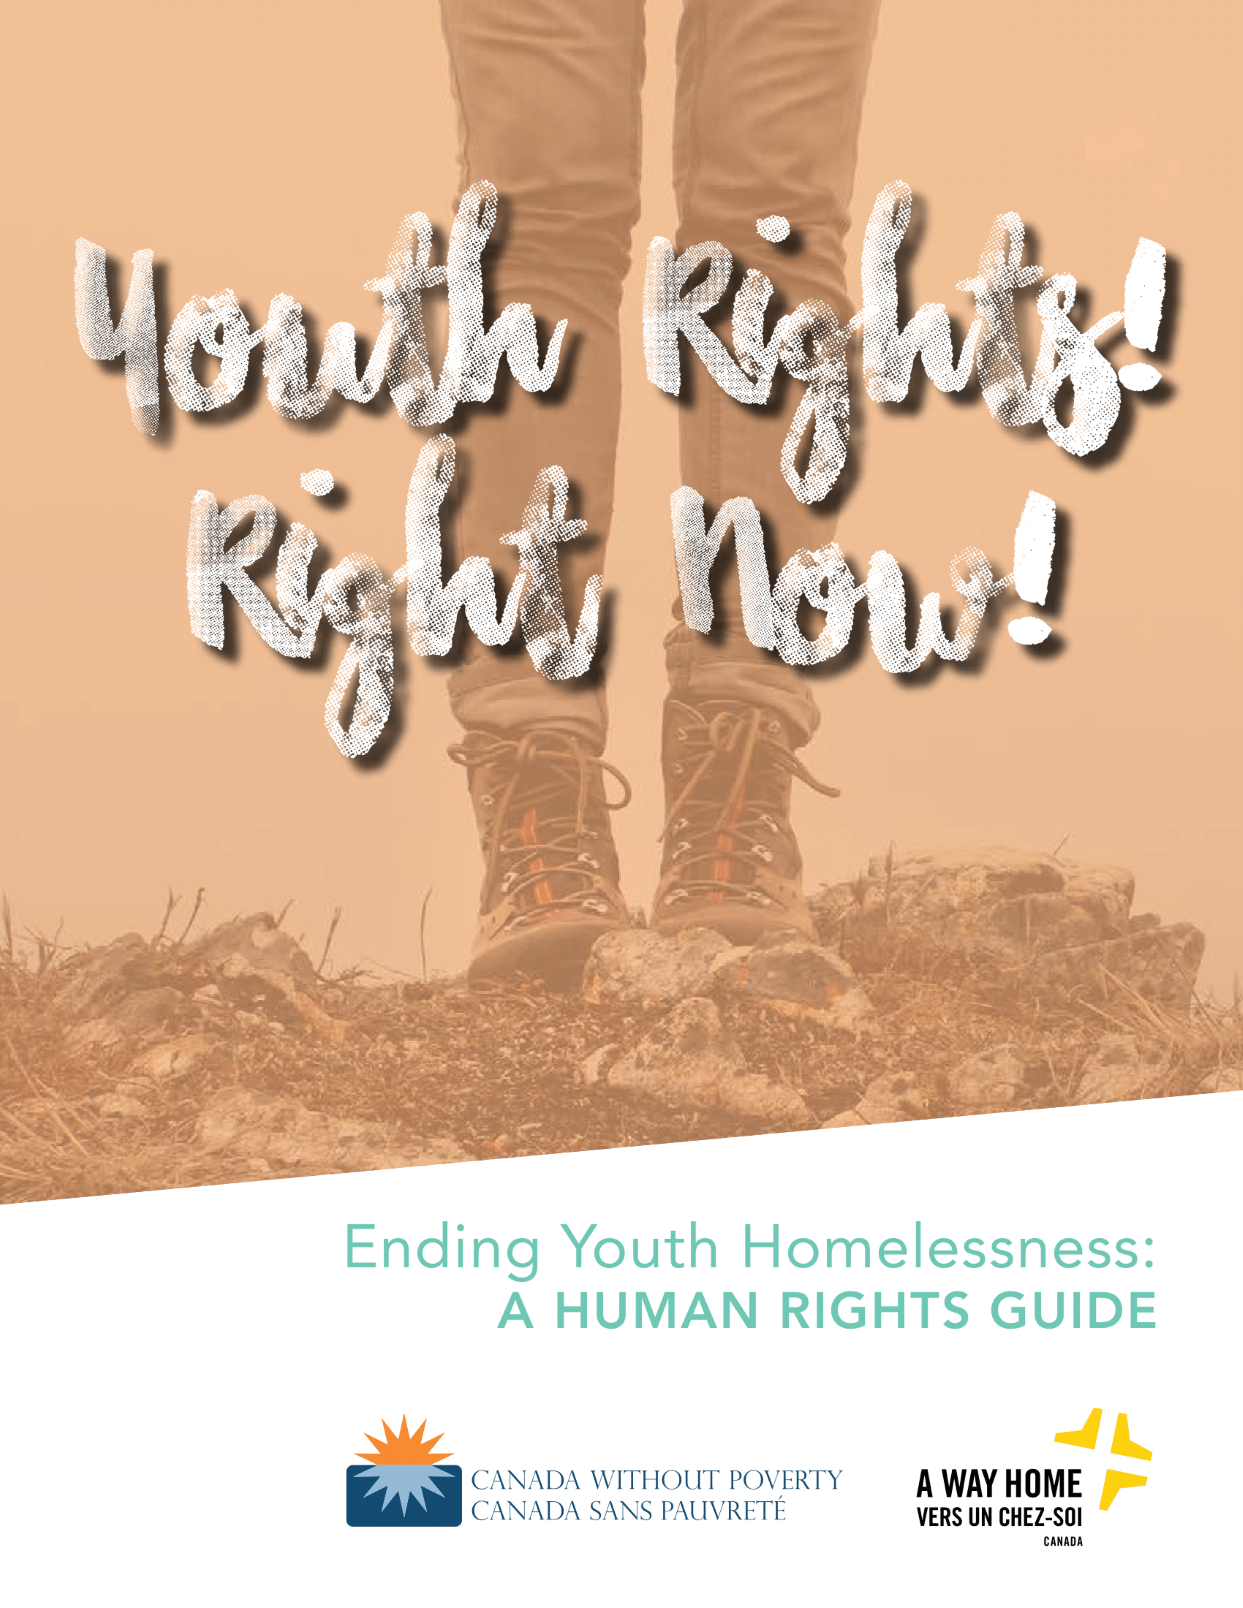 The front cover of the report "Youth Rights! Right Now!"